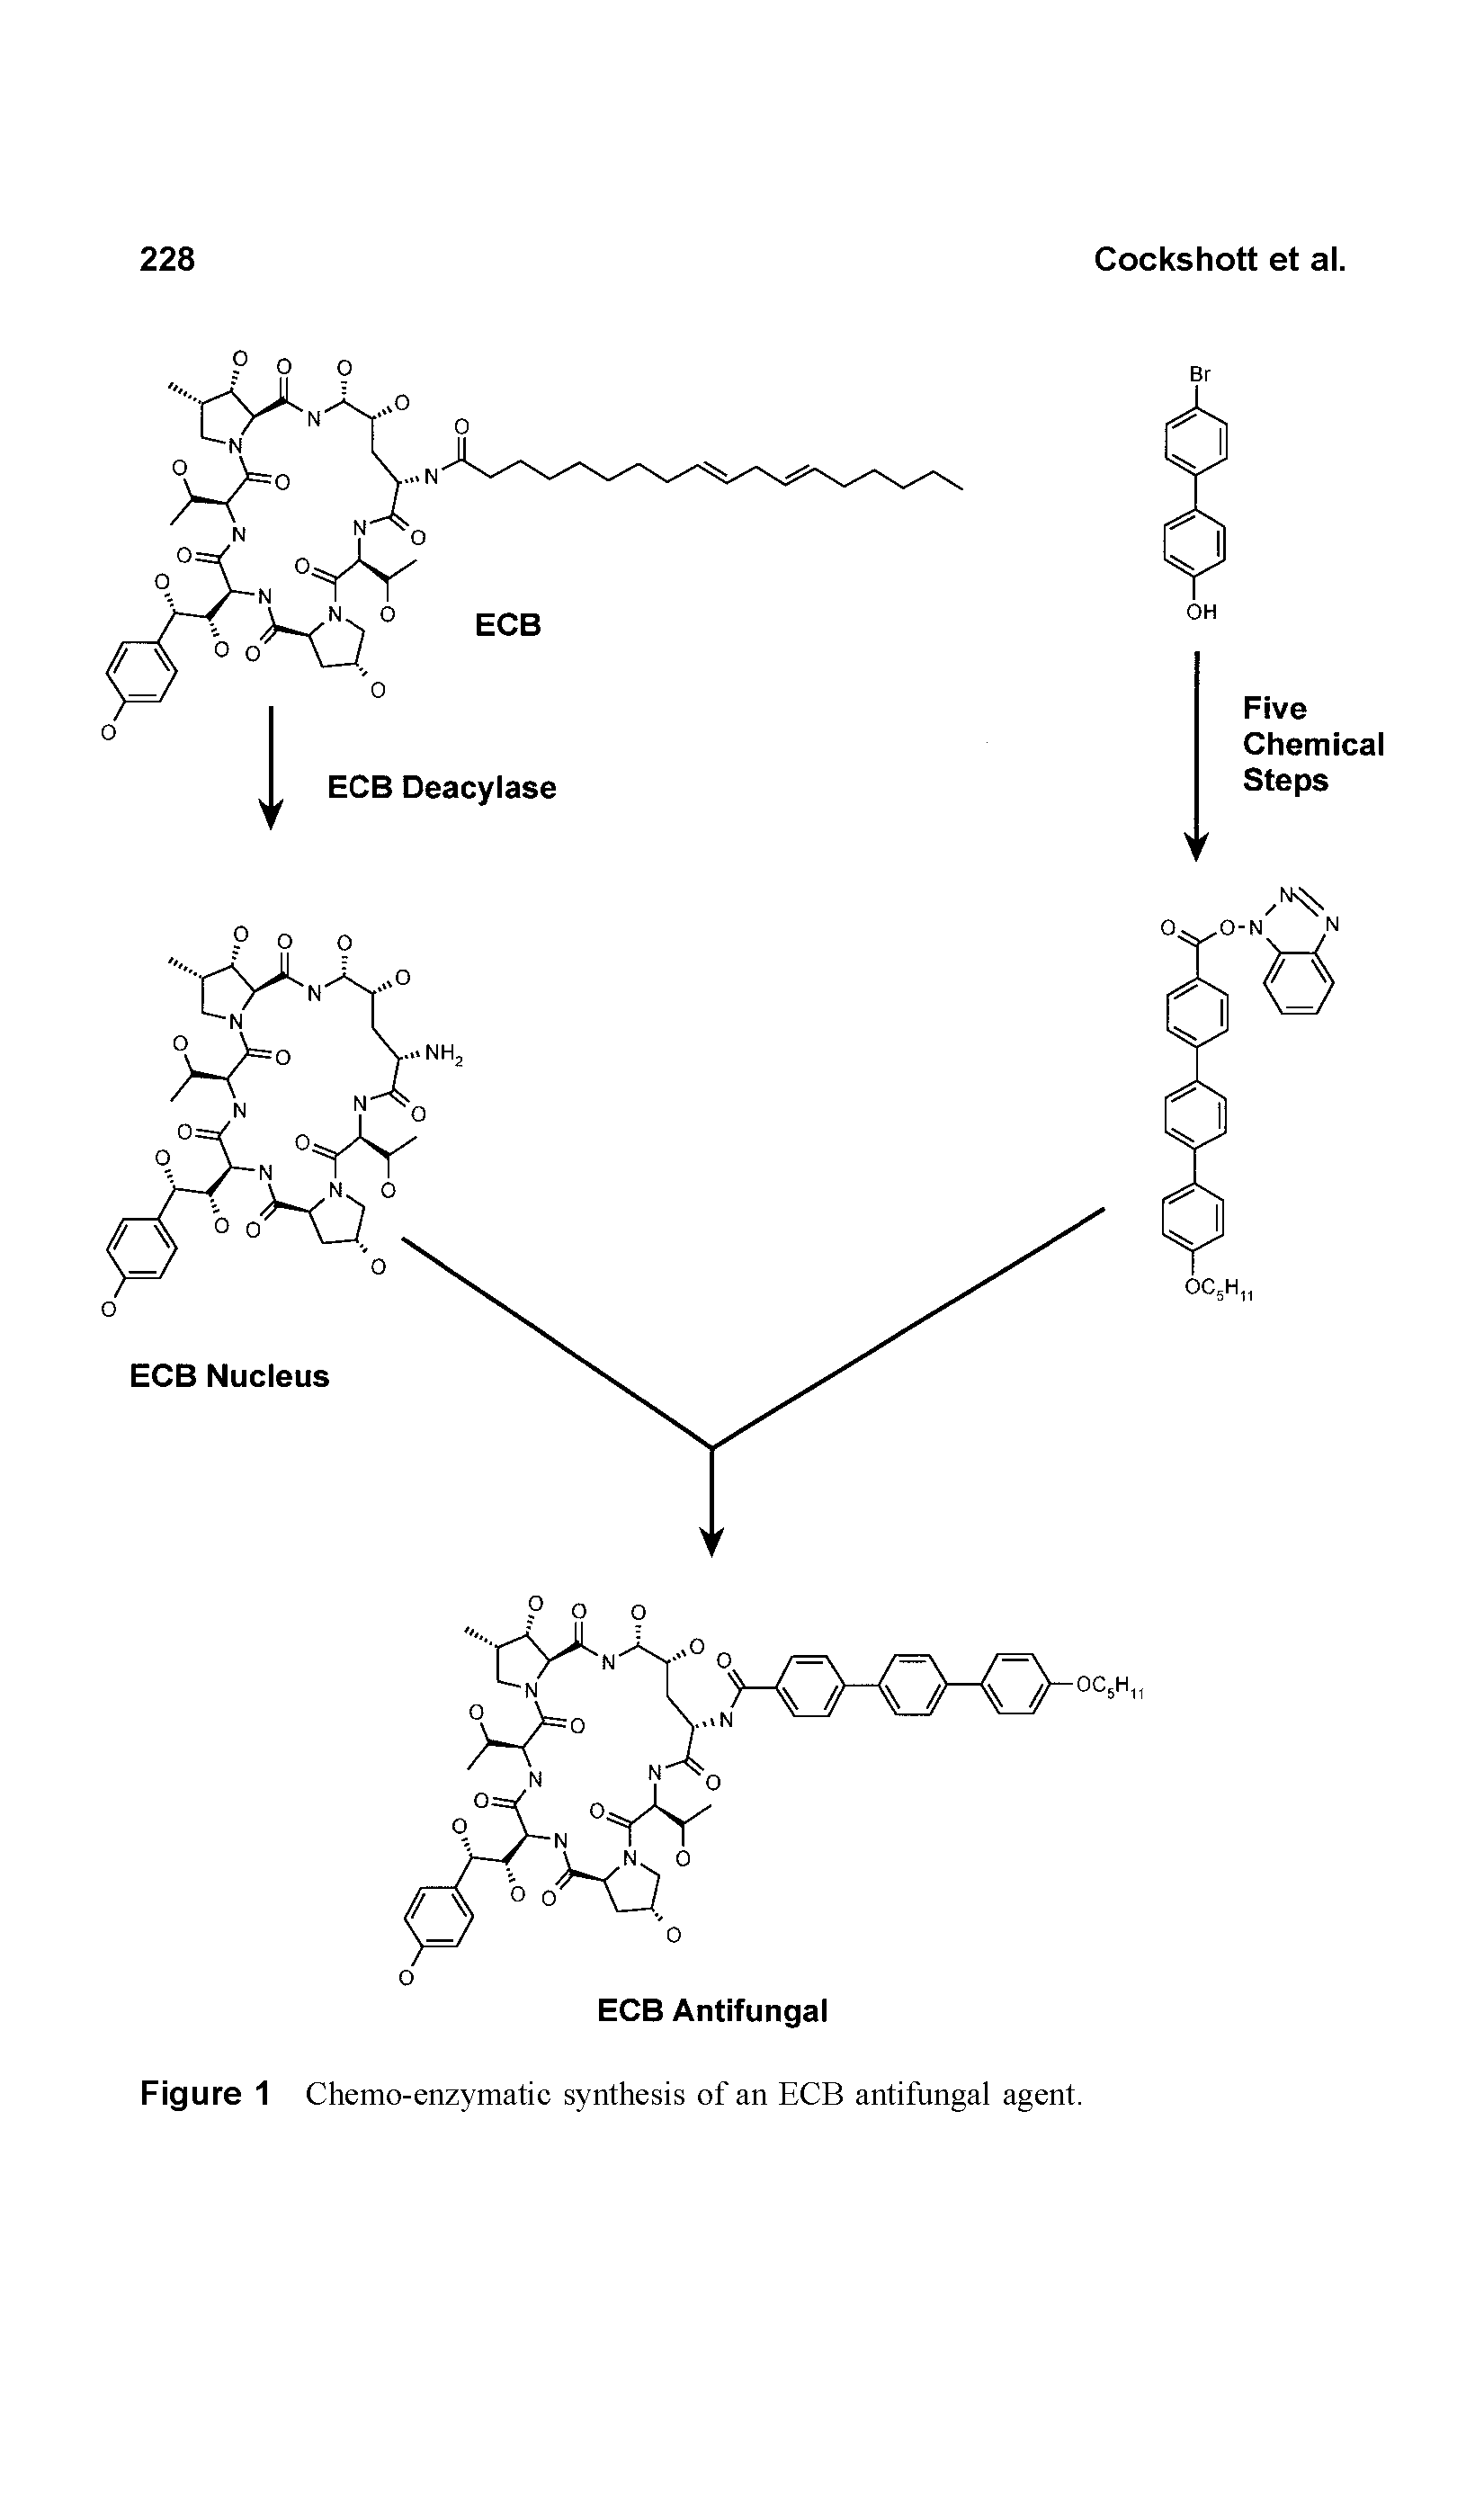 Figure 1 Chemo-enzymatic synthesis of an ECB antifungal agent.